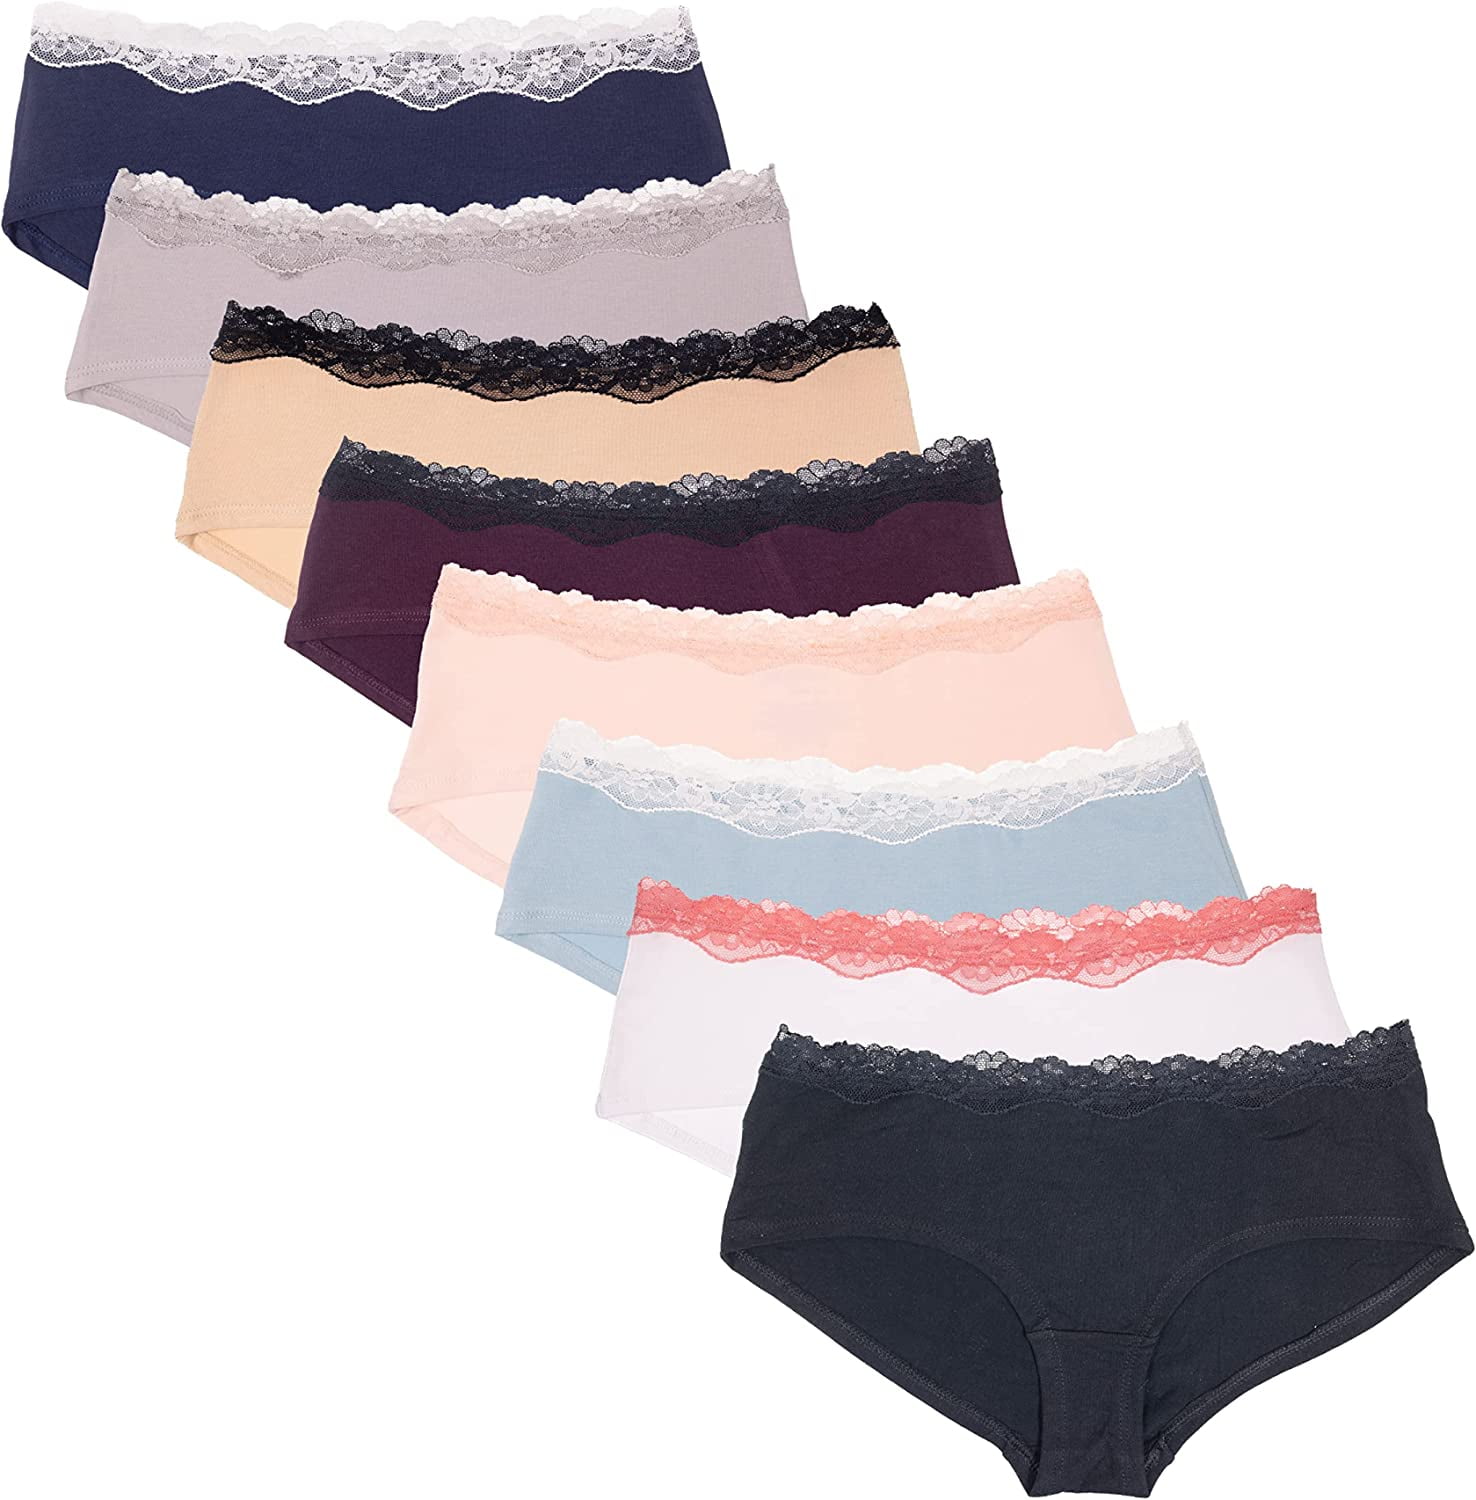 Womens Underwear Hipster Panties Soft Cotton Hug Fit- 8 Pack Small - L